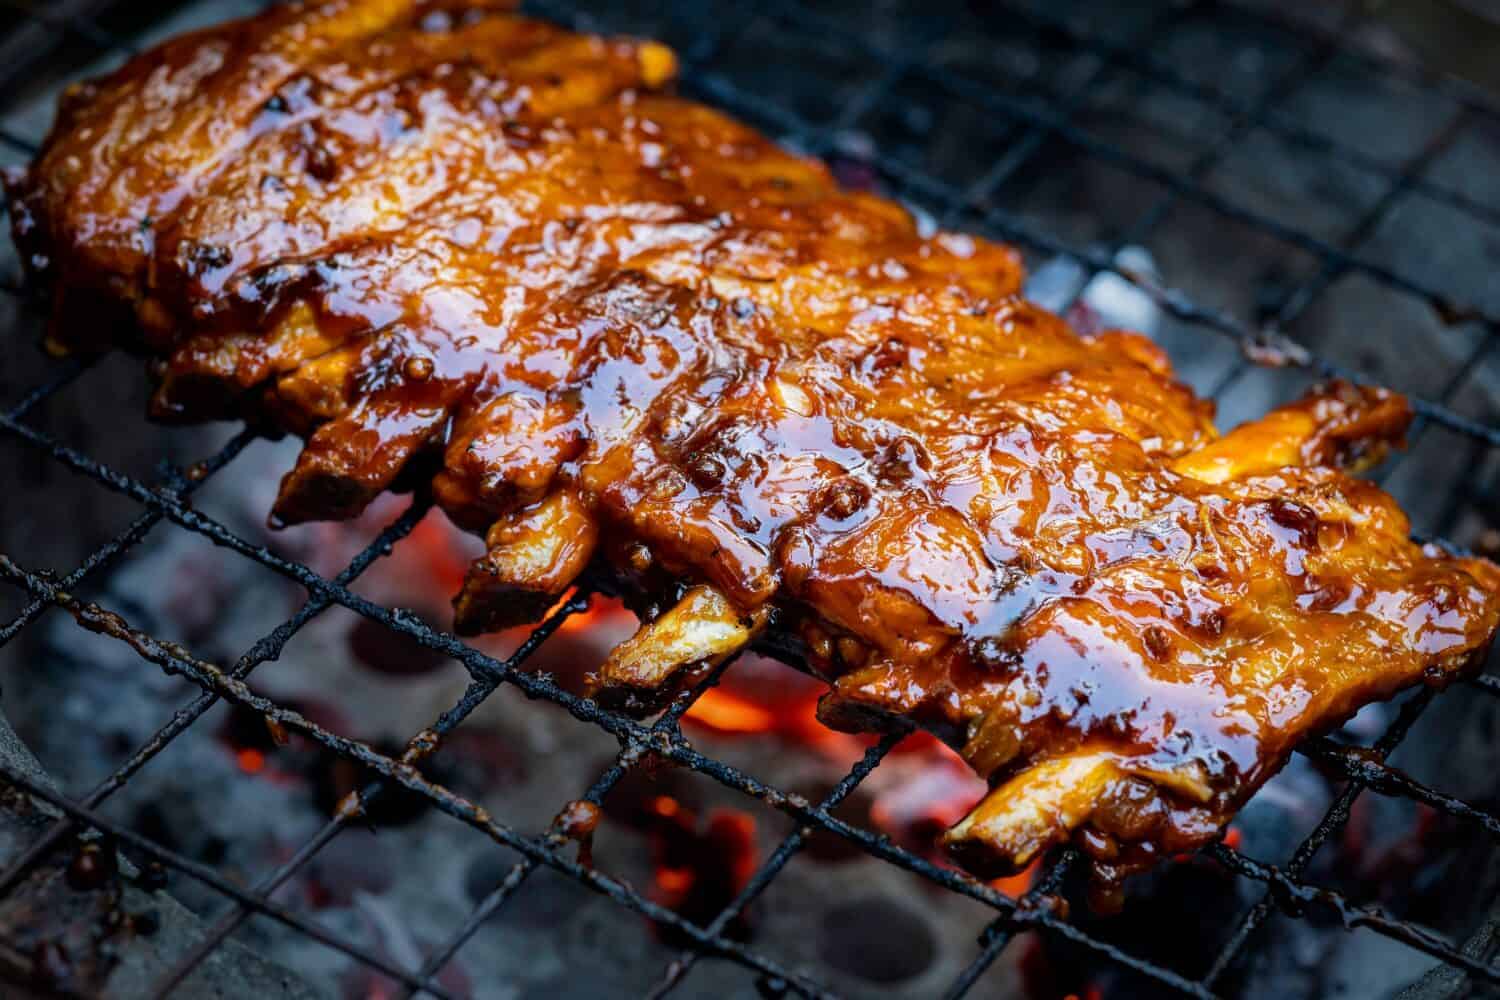 Pork ribs being grilled on smoldering charcoal